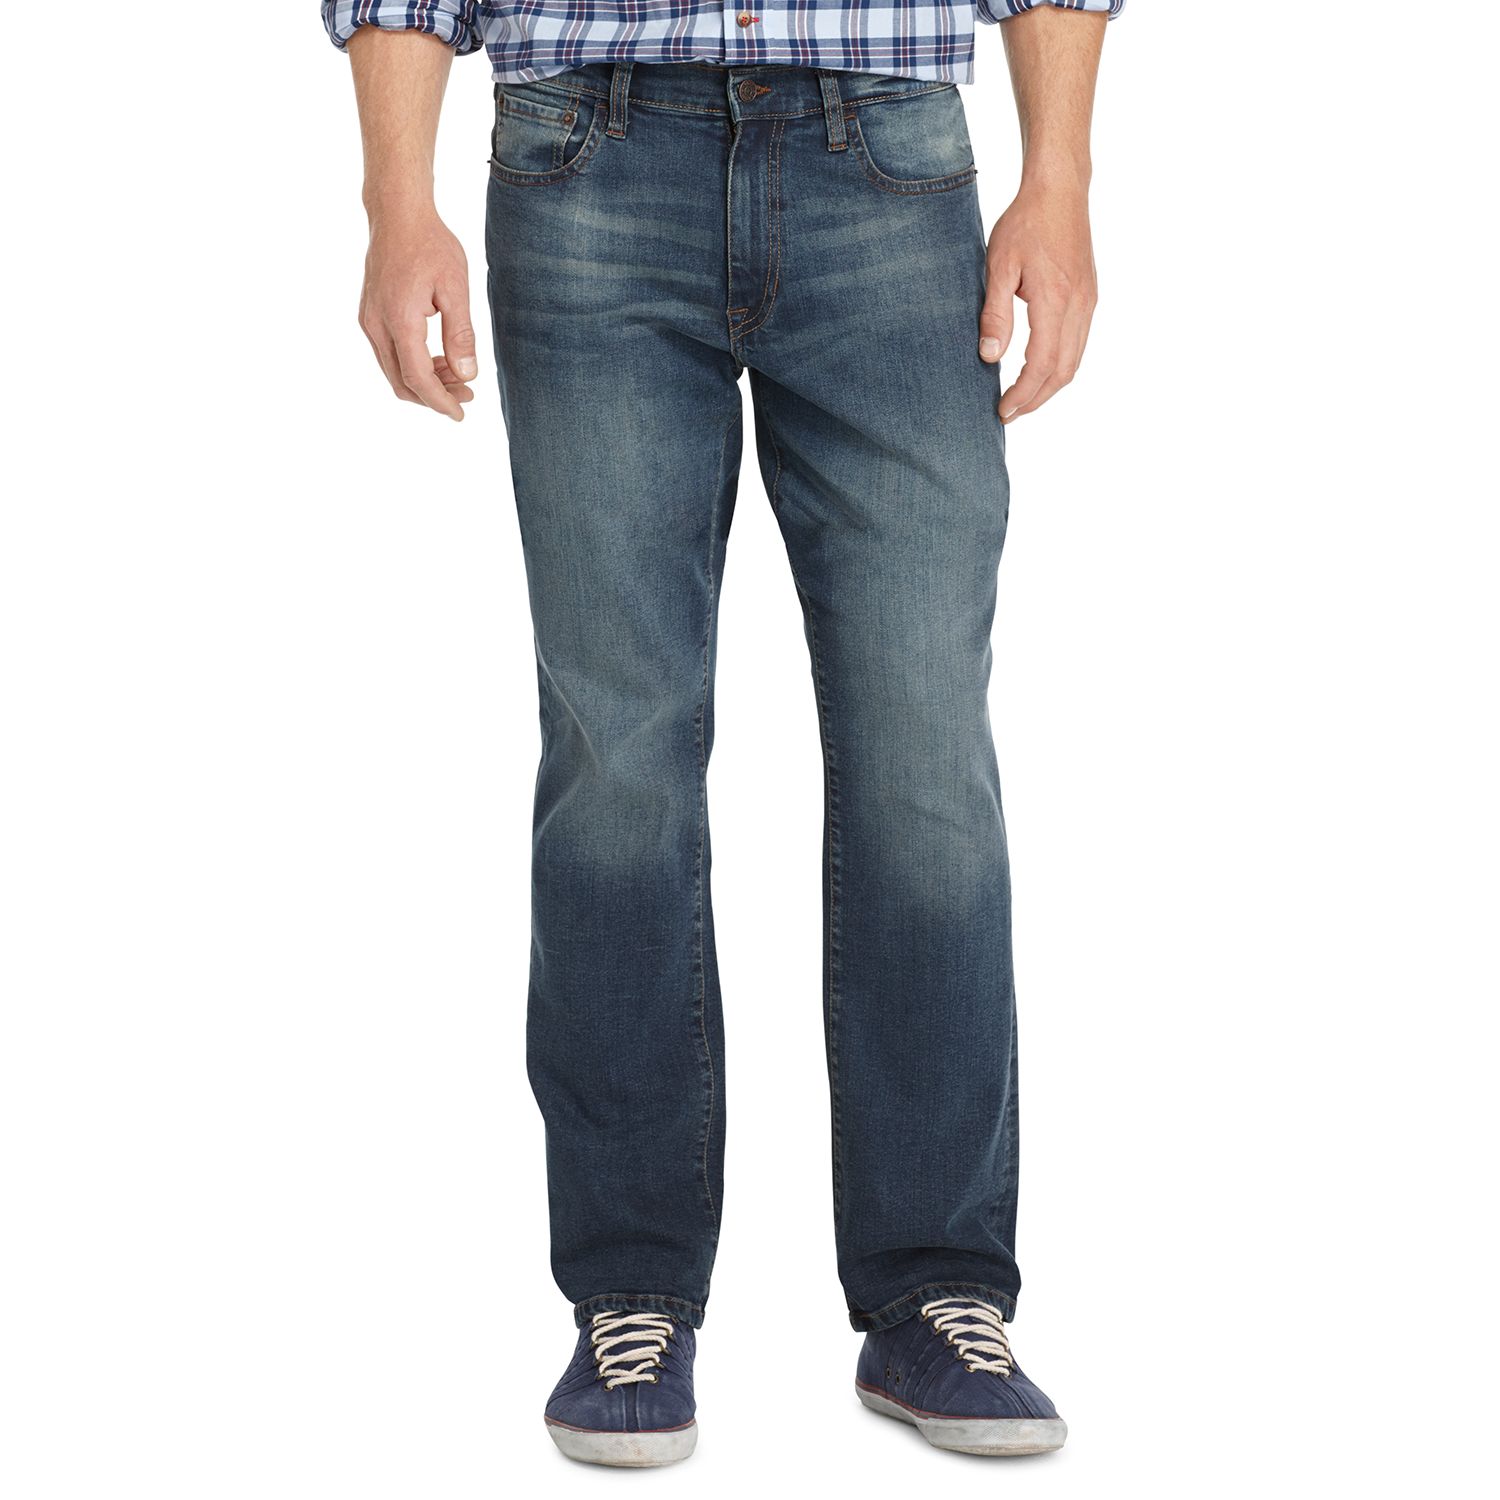 izod comfort stretch jeans relaxed fit